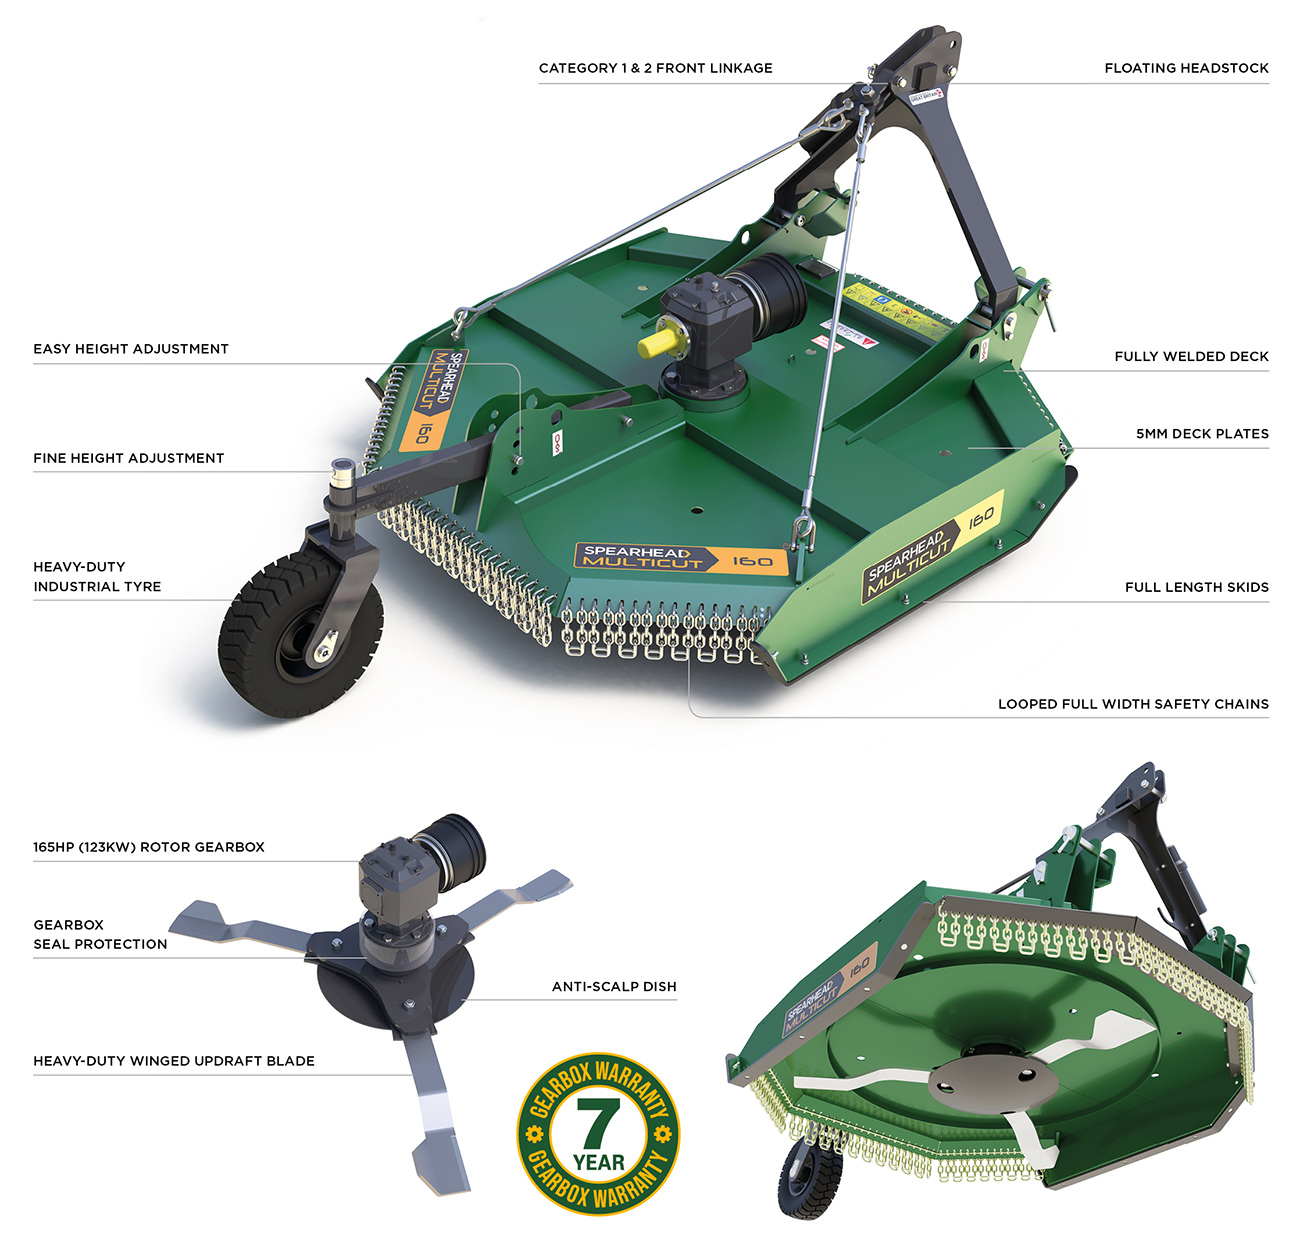 Multicut 160 Rotary Mower features